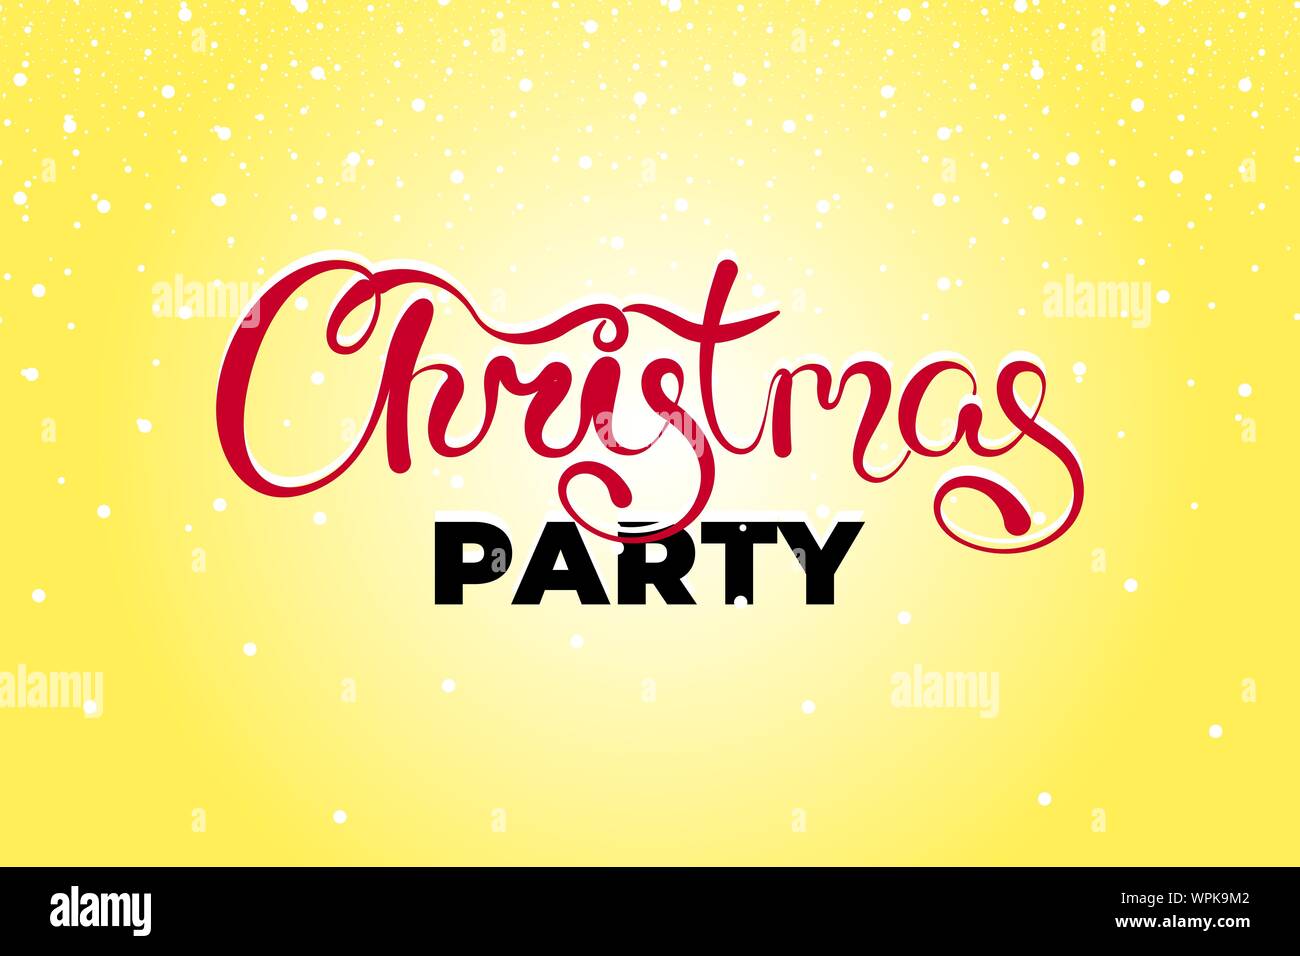 Merry Christmas Party text hand drawn calligraphic lettering design. Happy New Year holiday twist typography greeting gift poster. Xmas calligraphy font style yellow banner. Vector type illustration Stock Vector